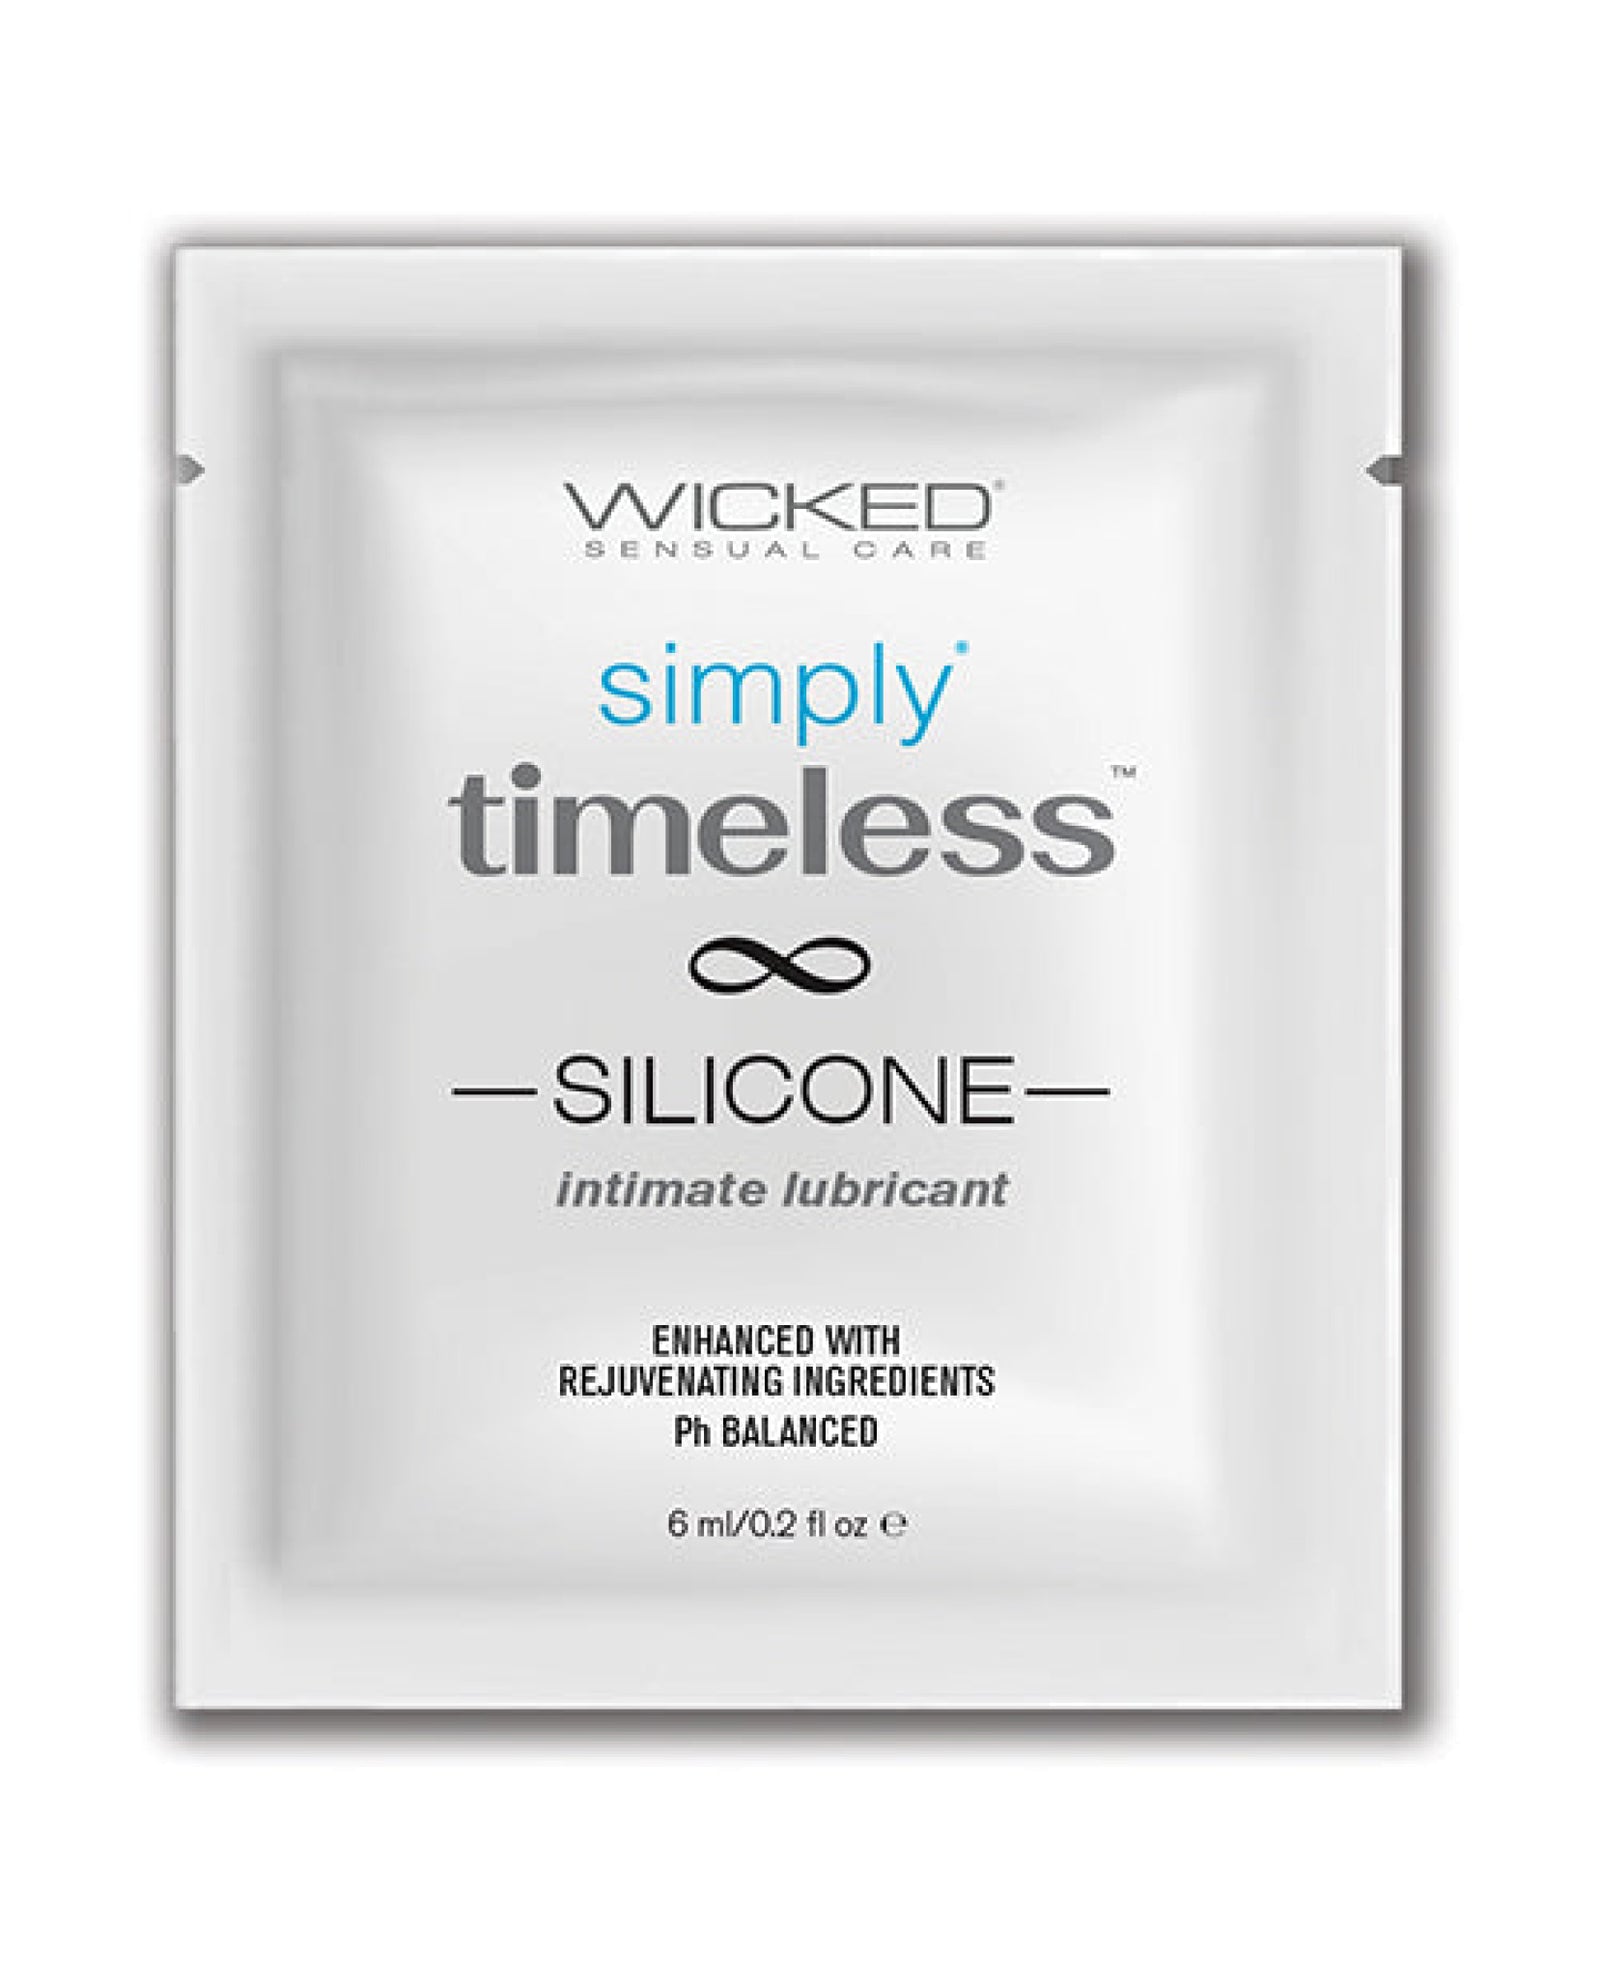 Wicked Sensual Care Simply Timeless Silicone Lubricant - oz Wicked Sensual Care